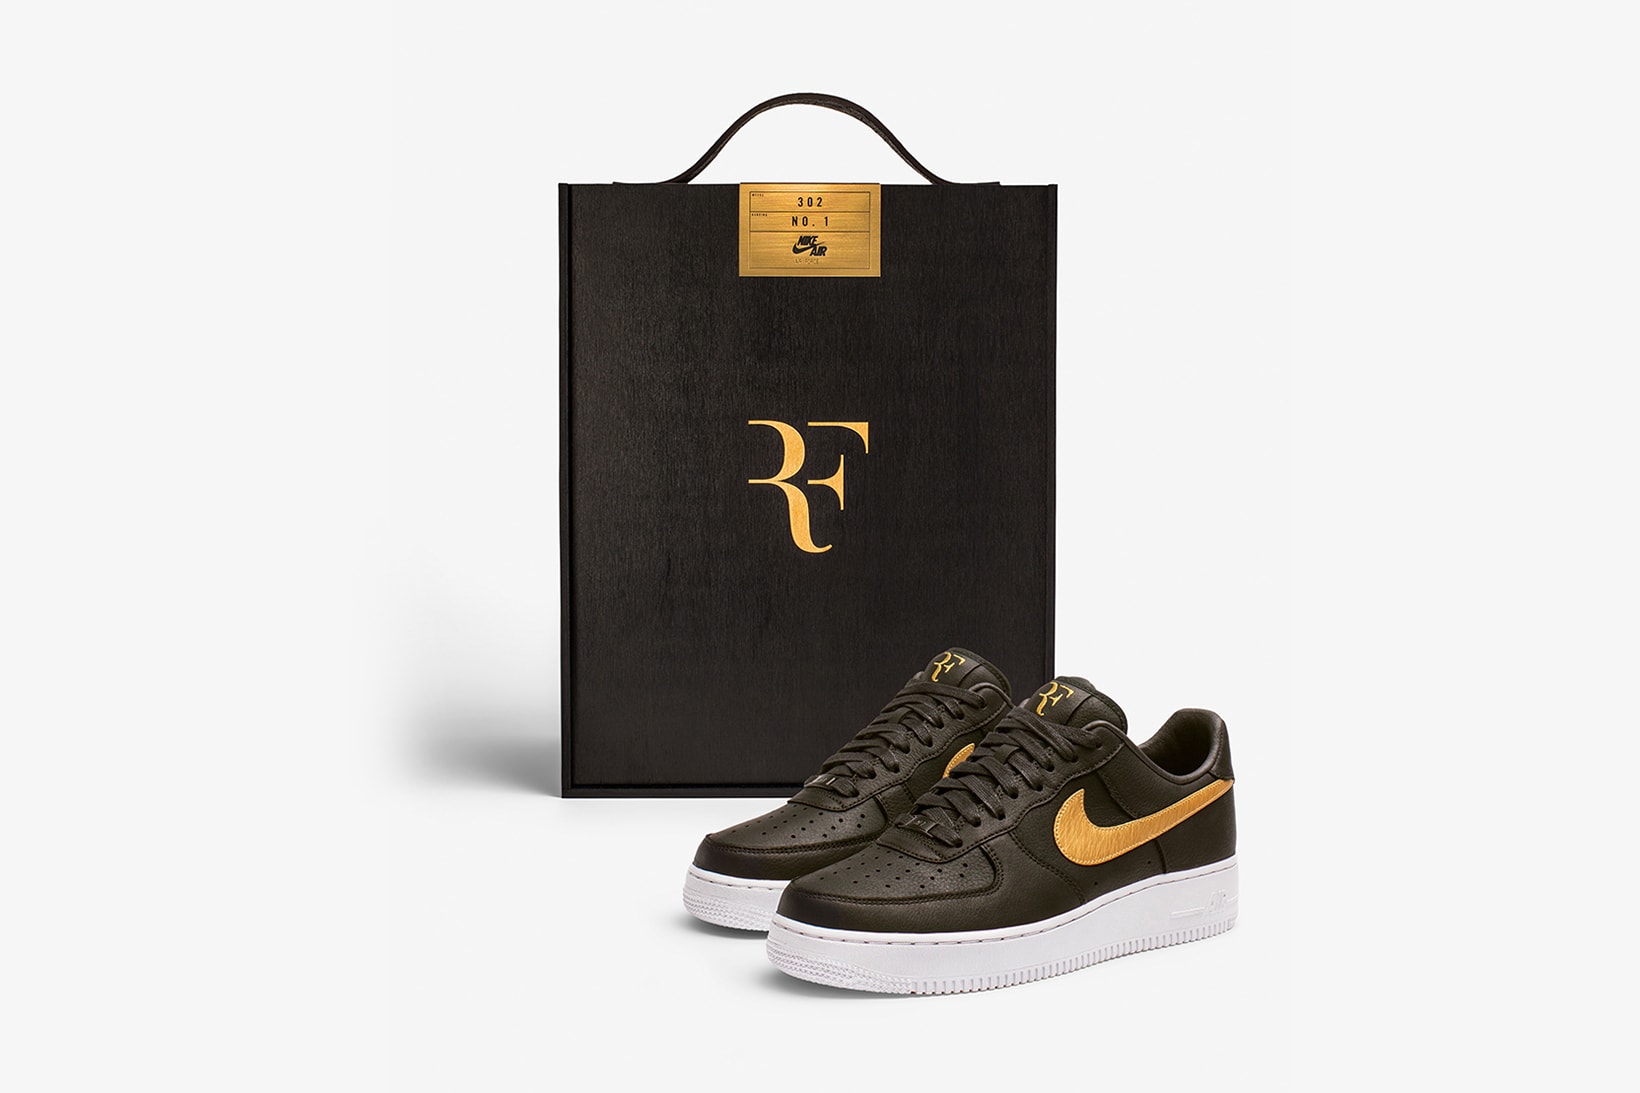 Nike Air Force 1 Low Roger Federer Forever RF1 2018 february sneakers shoes footwear